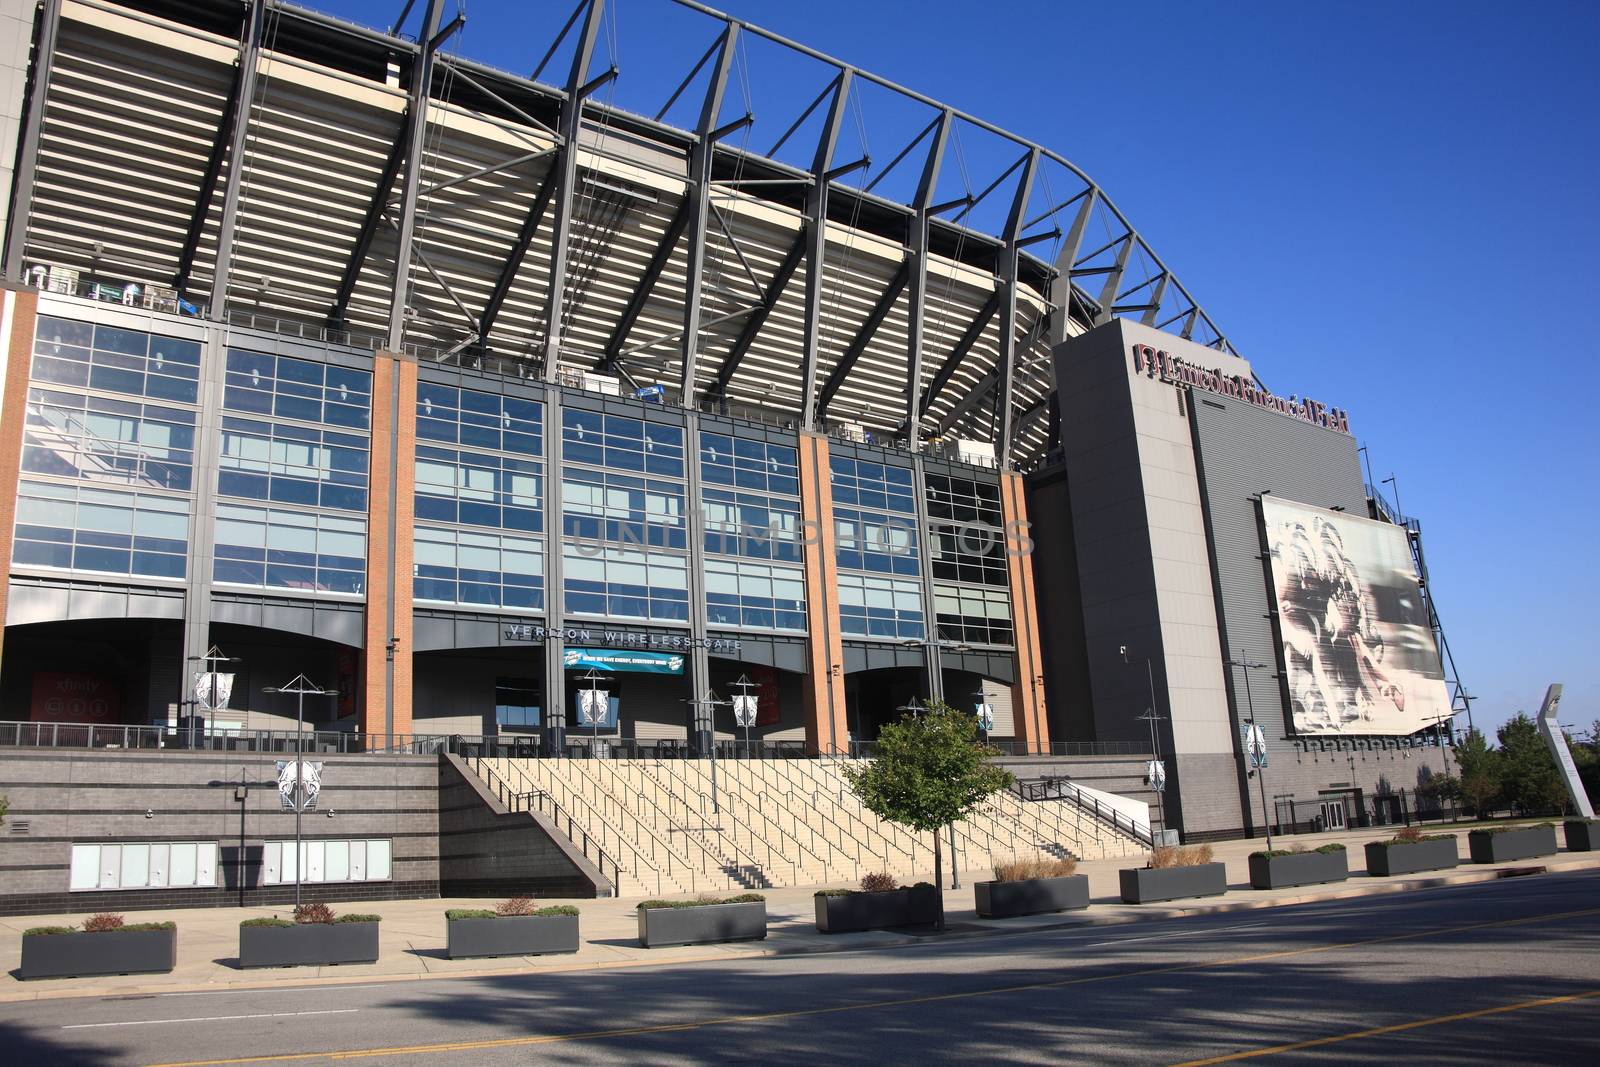 Philadelphia Eagles - Lincoln Financial Field by Ffooter